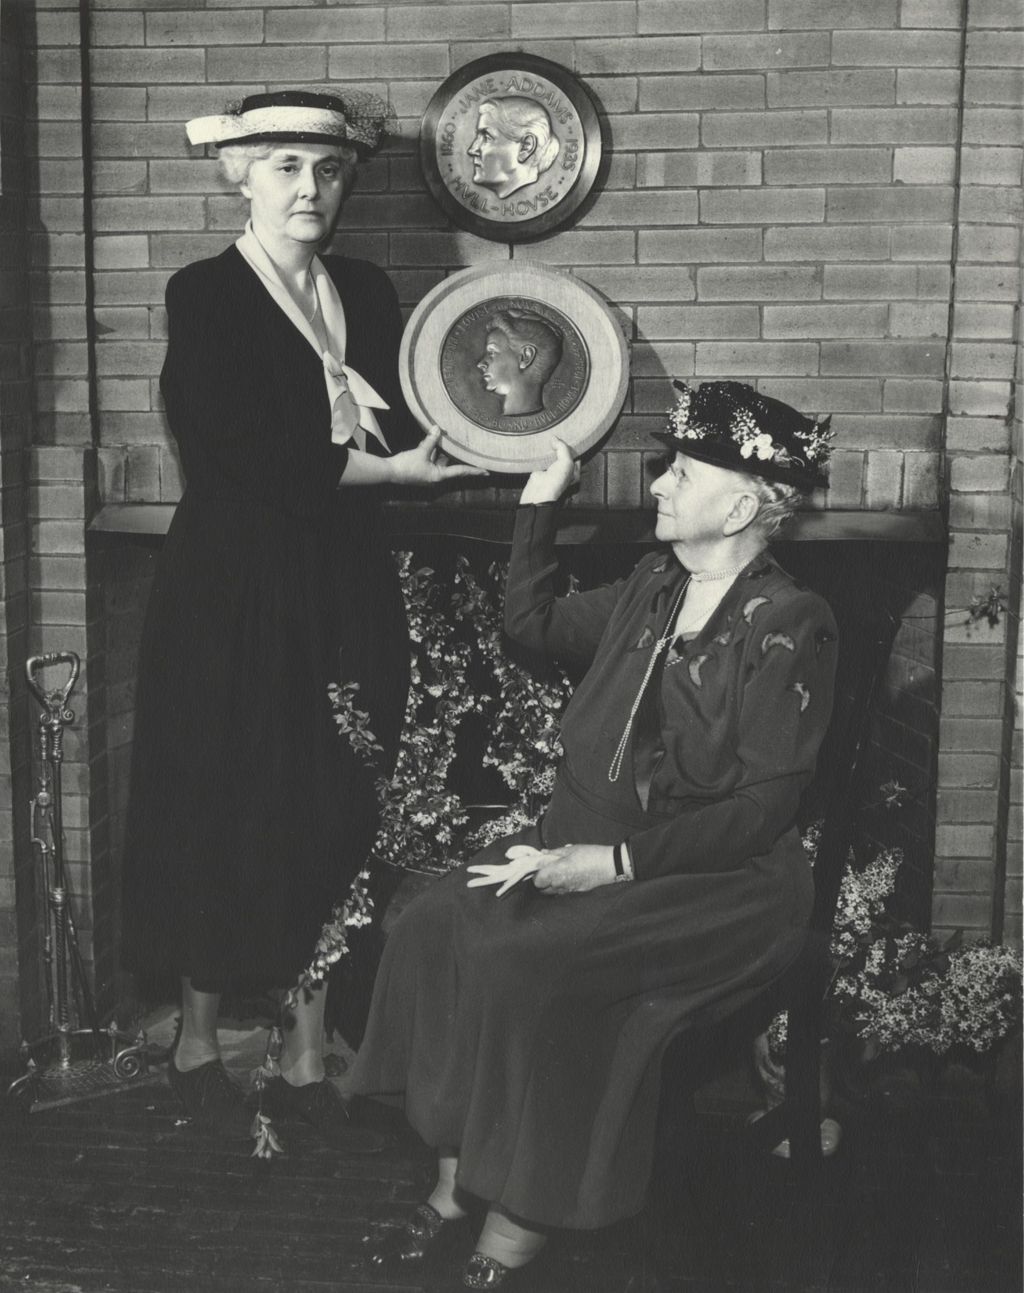 Louise de Koven Bowen and Hull-House board president Alma Petersen holding a bas relief plaque in Bowen's honor during the 1949 Hull-House Associates Dinner